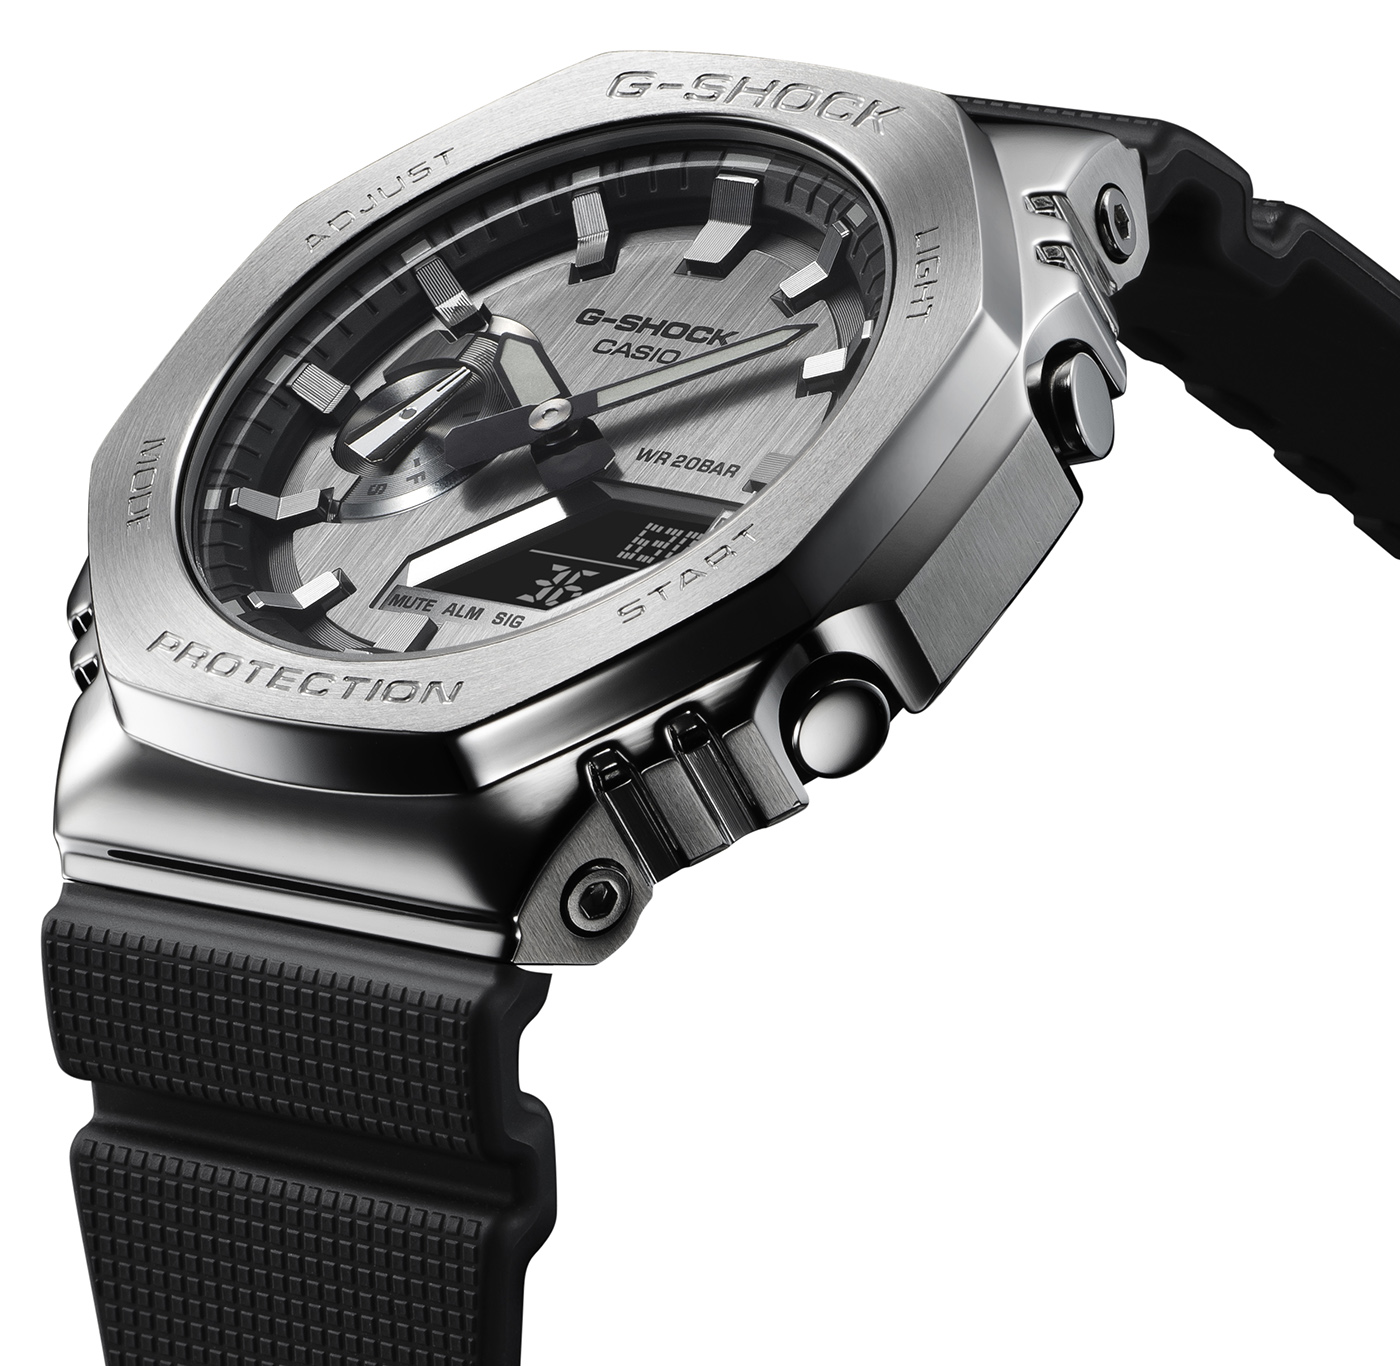 Casio Announces Metal Covered G Shock GM Watch Series